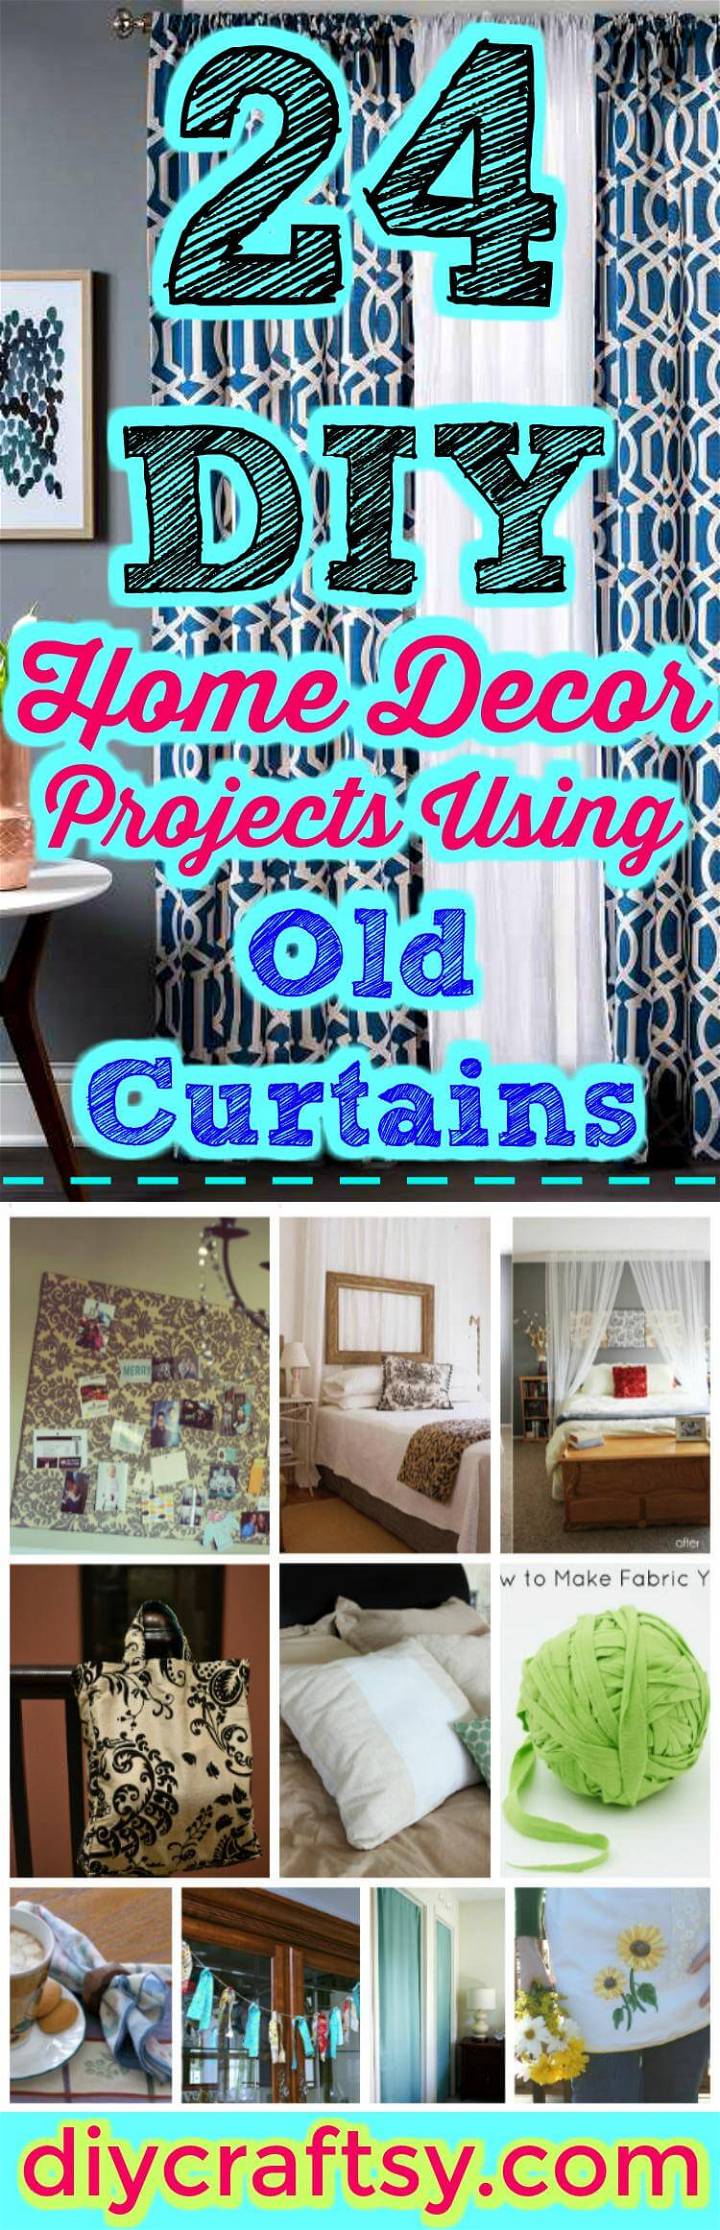 DIY Home Decor Projects Using Old Curtains